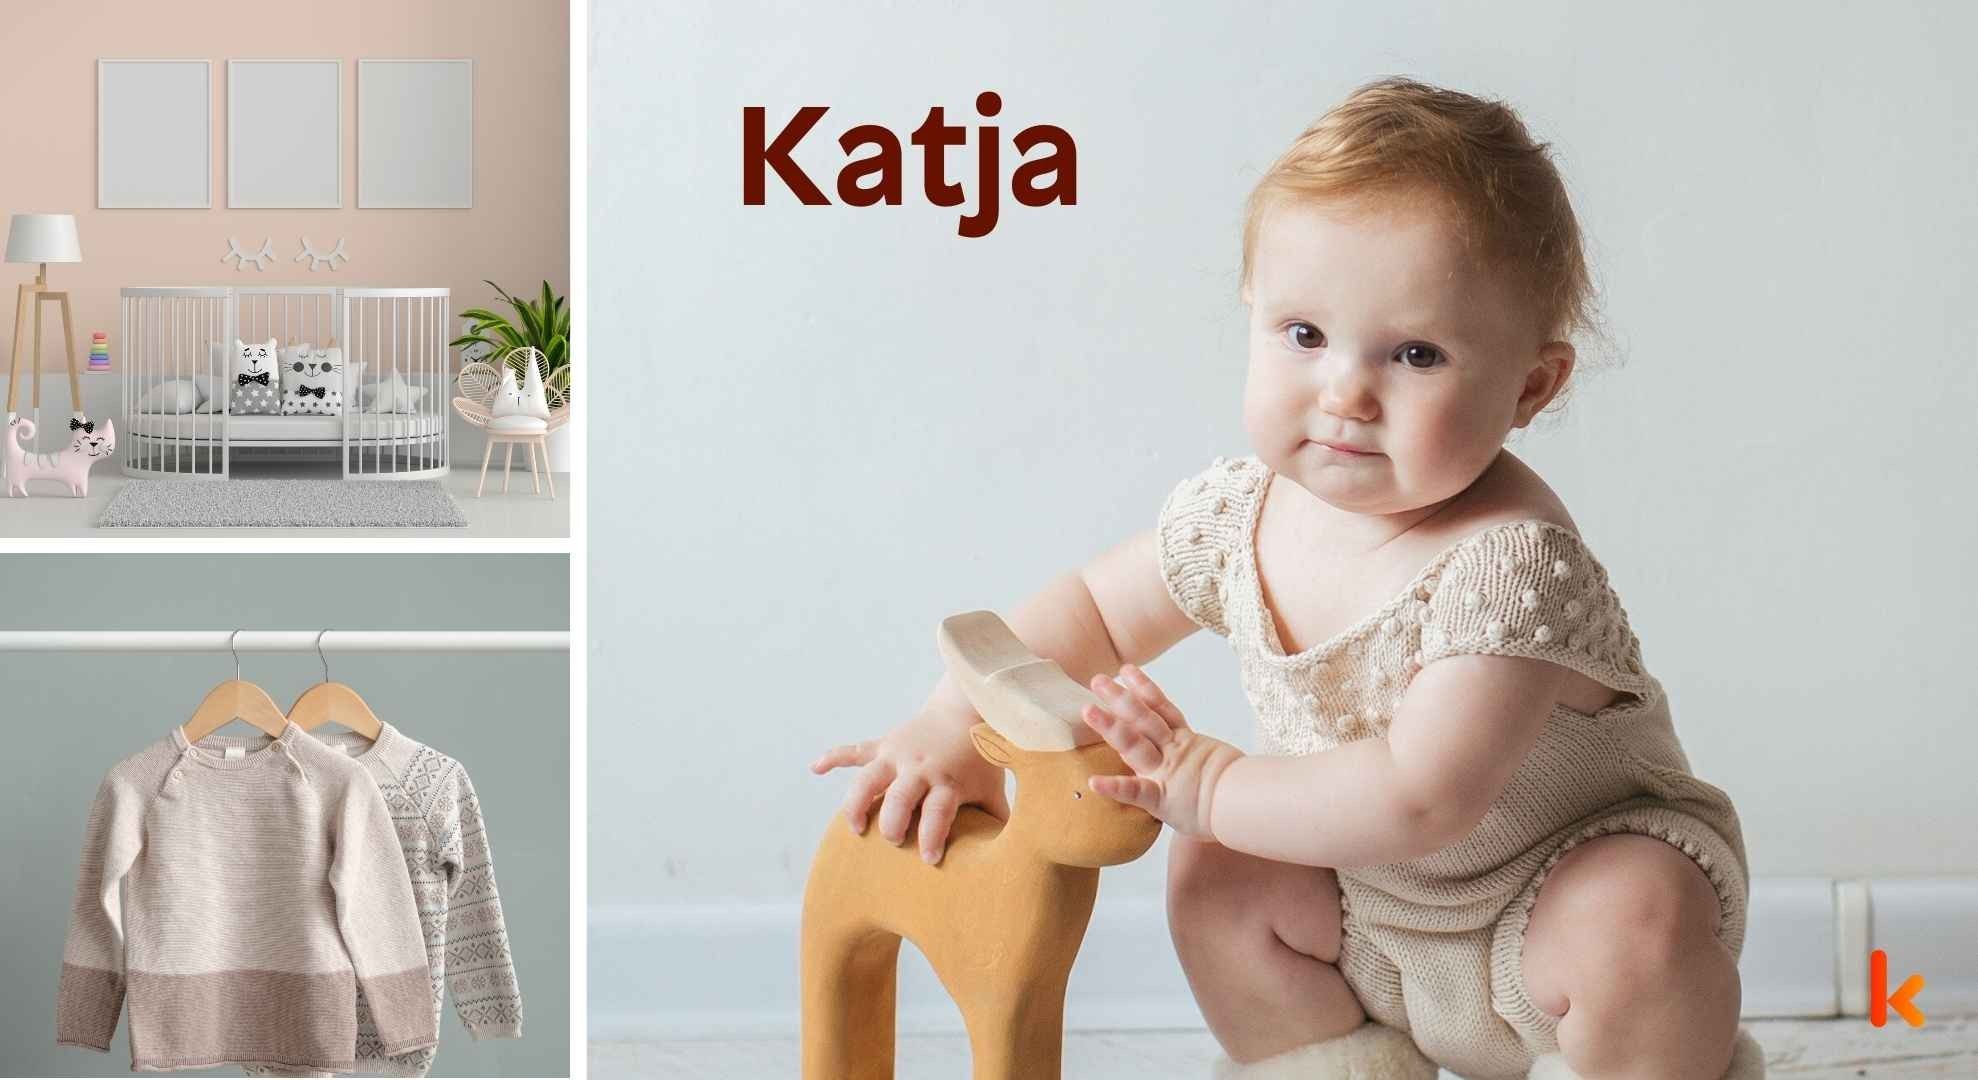 Meaning of the name Katja